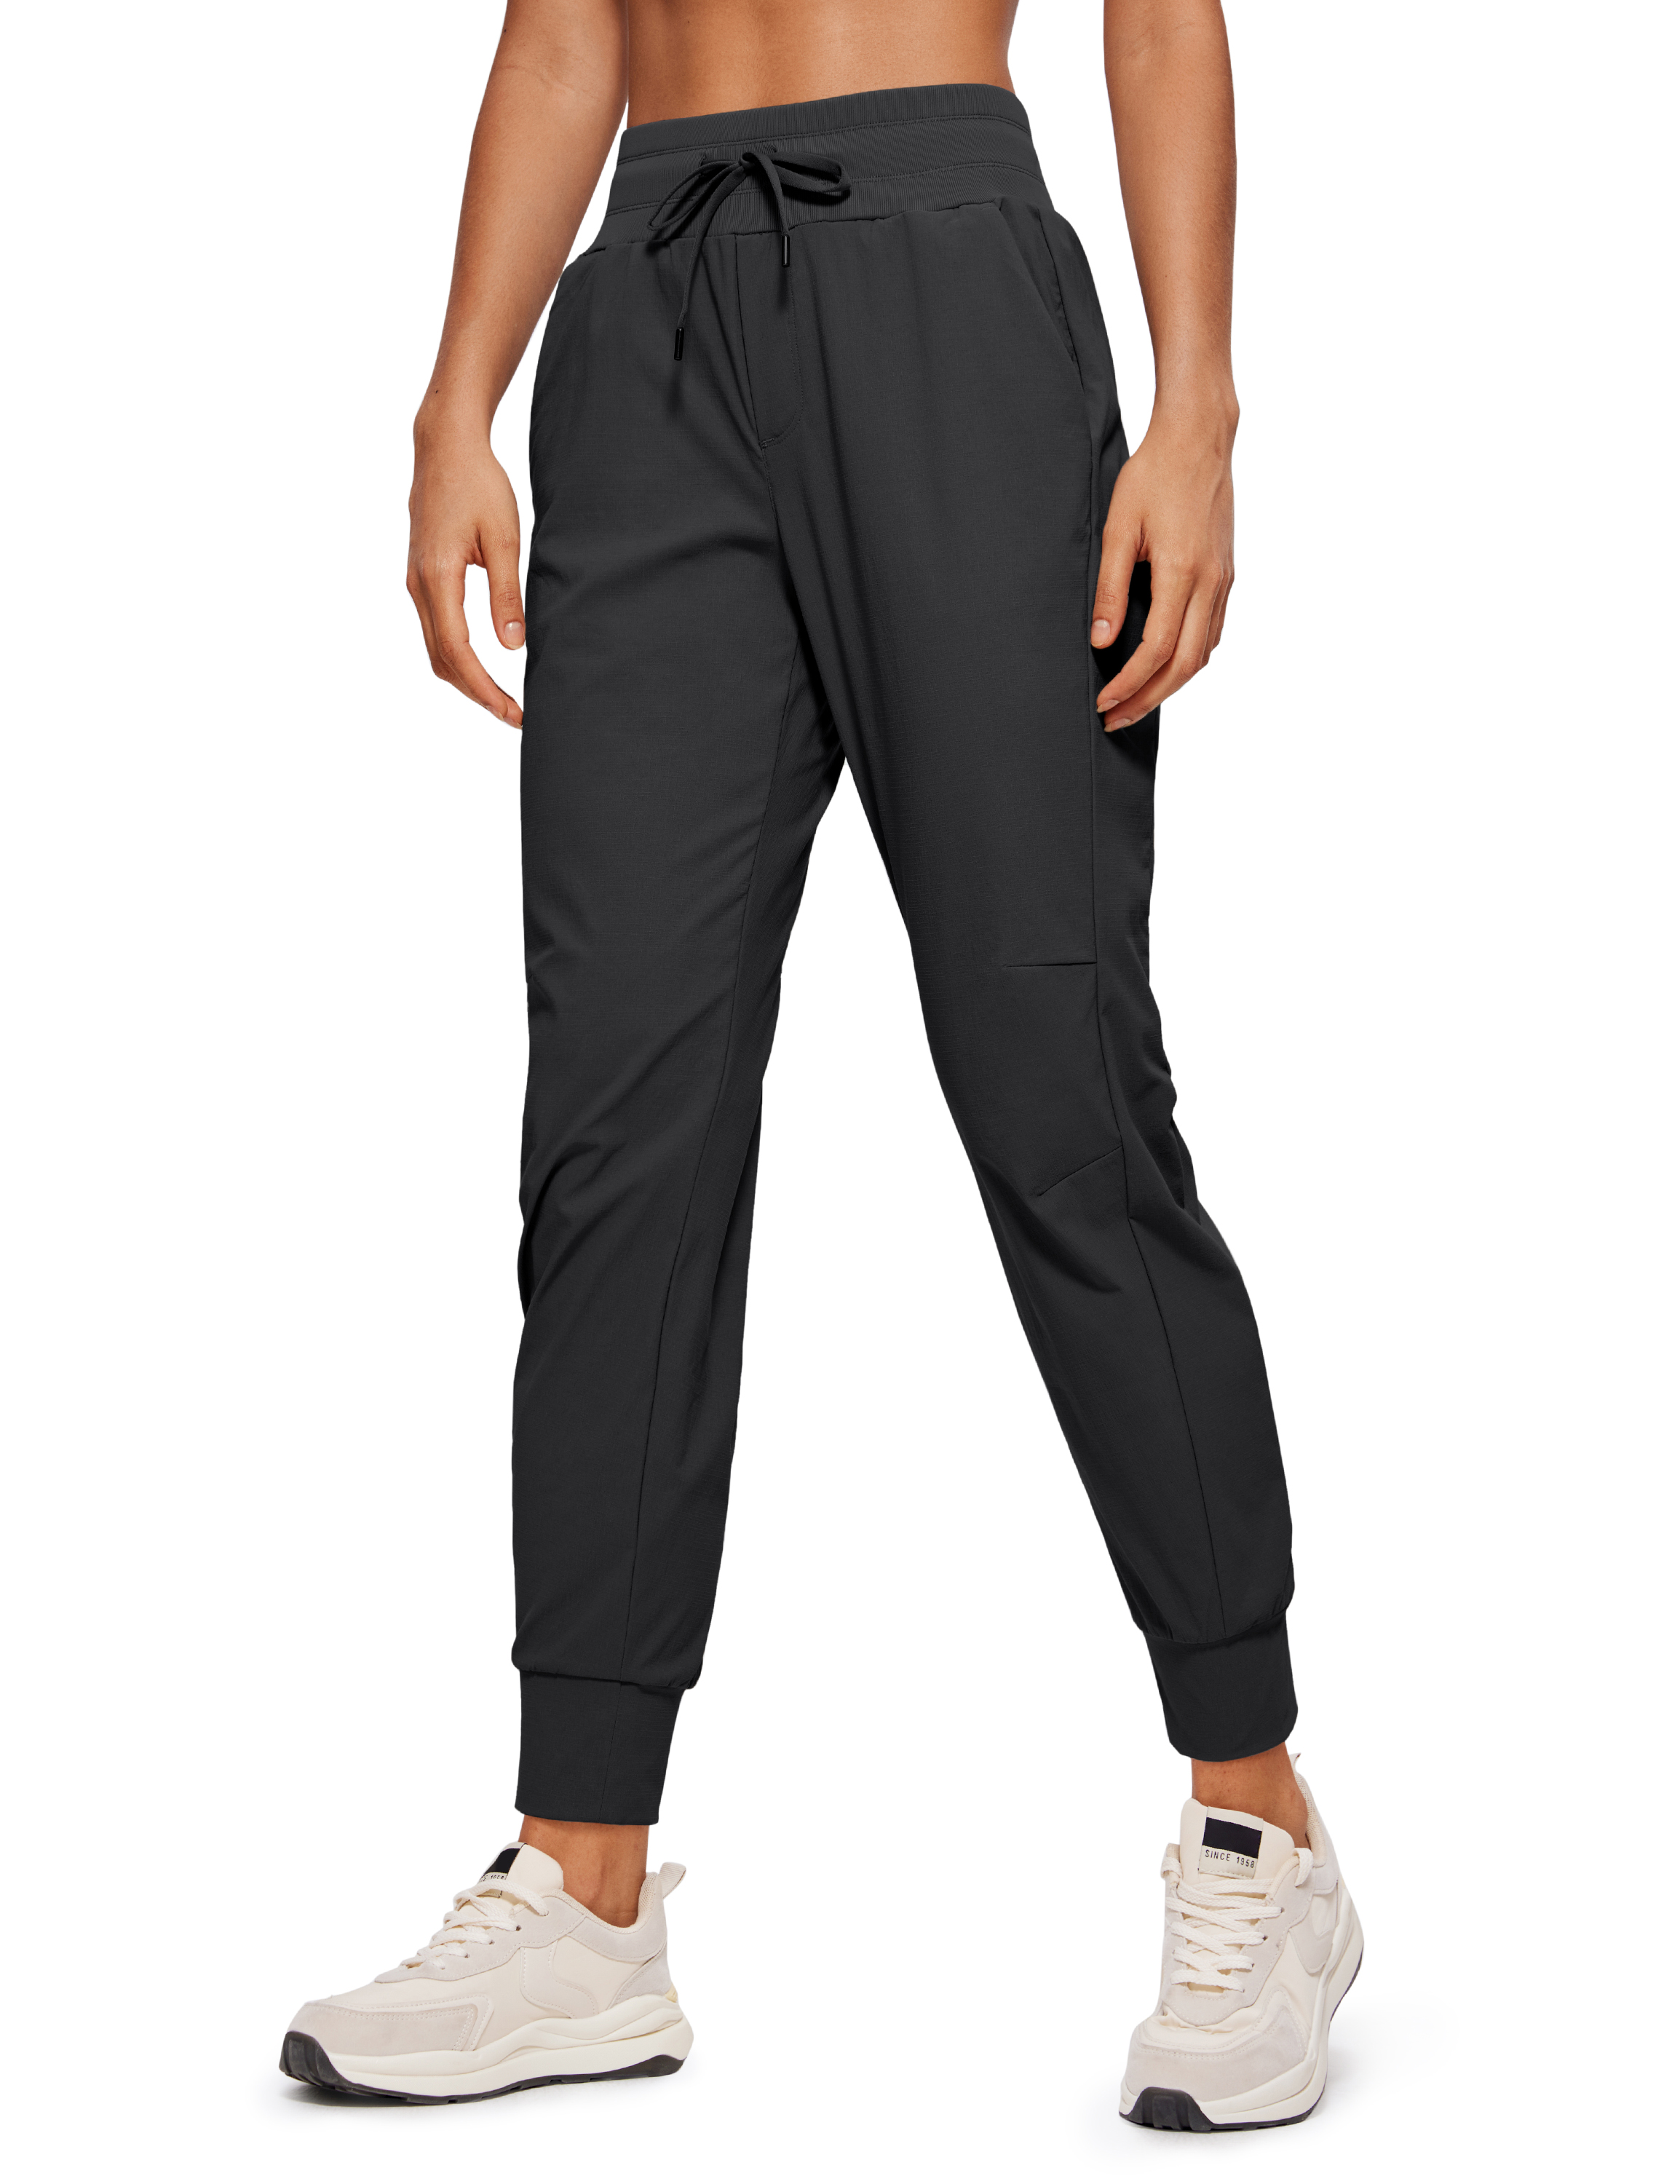  CRZ YOGA Lightweight Workout Joggers for Women, High Waisted  Outdoor Running Casual Track Pants with Pockets Black XX-Small : Clothing,  Shoes & Jewelry